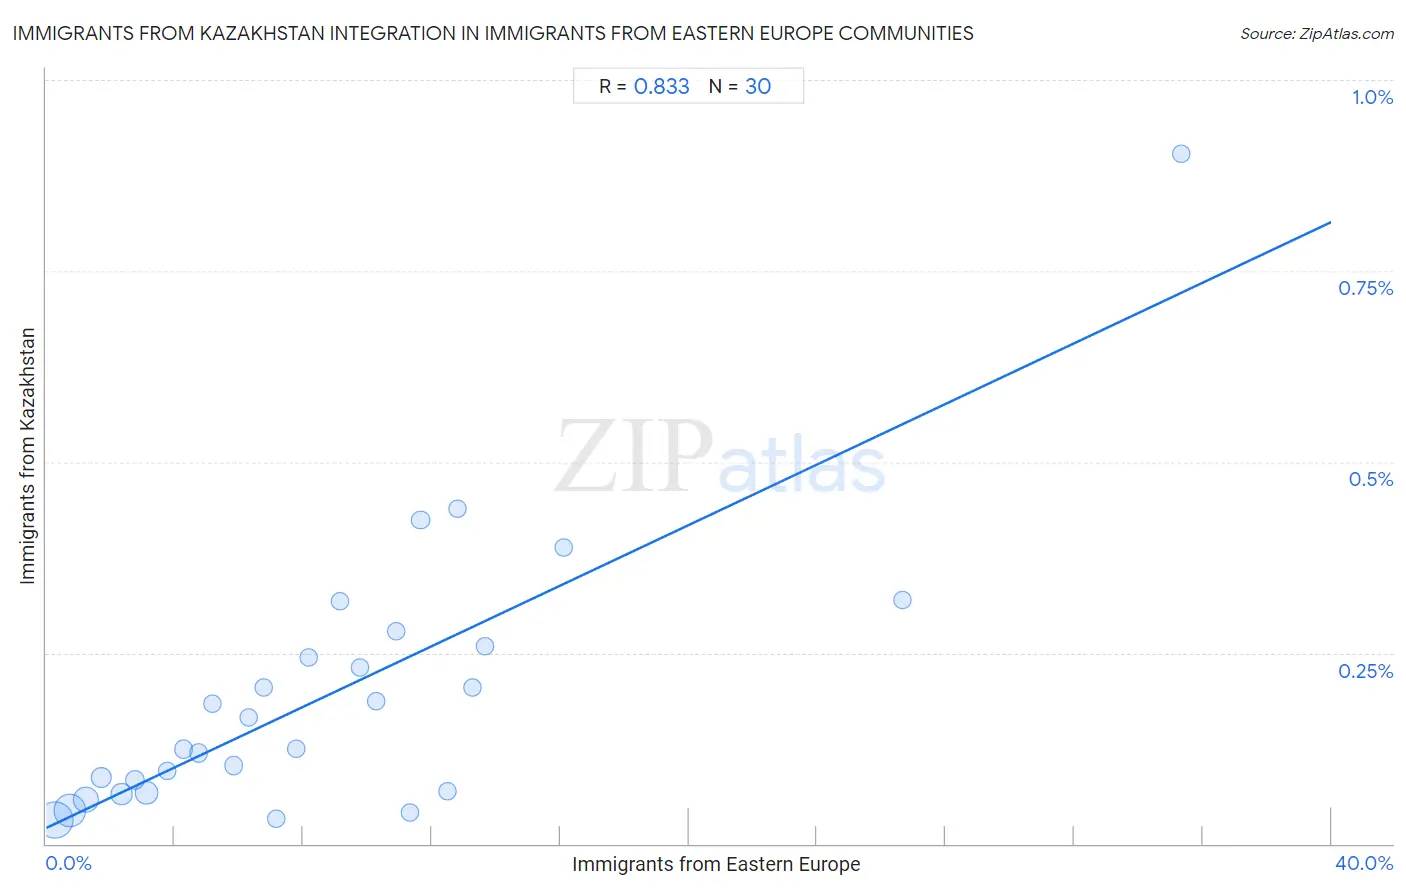 Immigrants from Eastern Europe Integration in Immigrants from Kazakhstan Communities